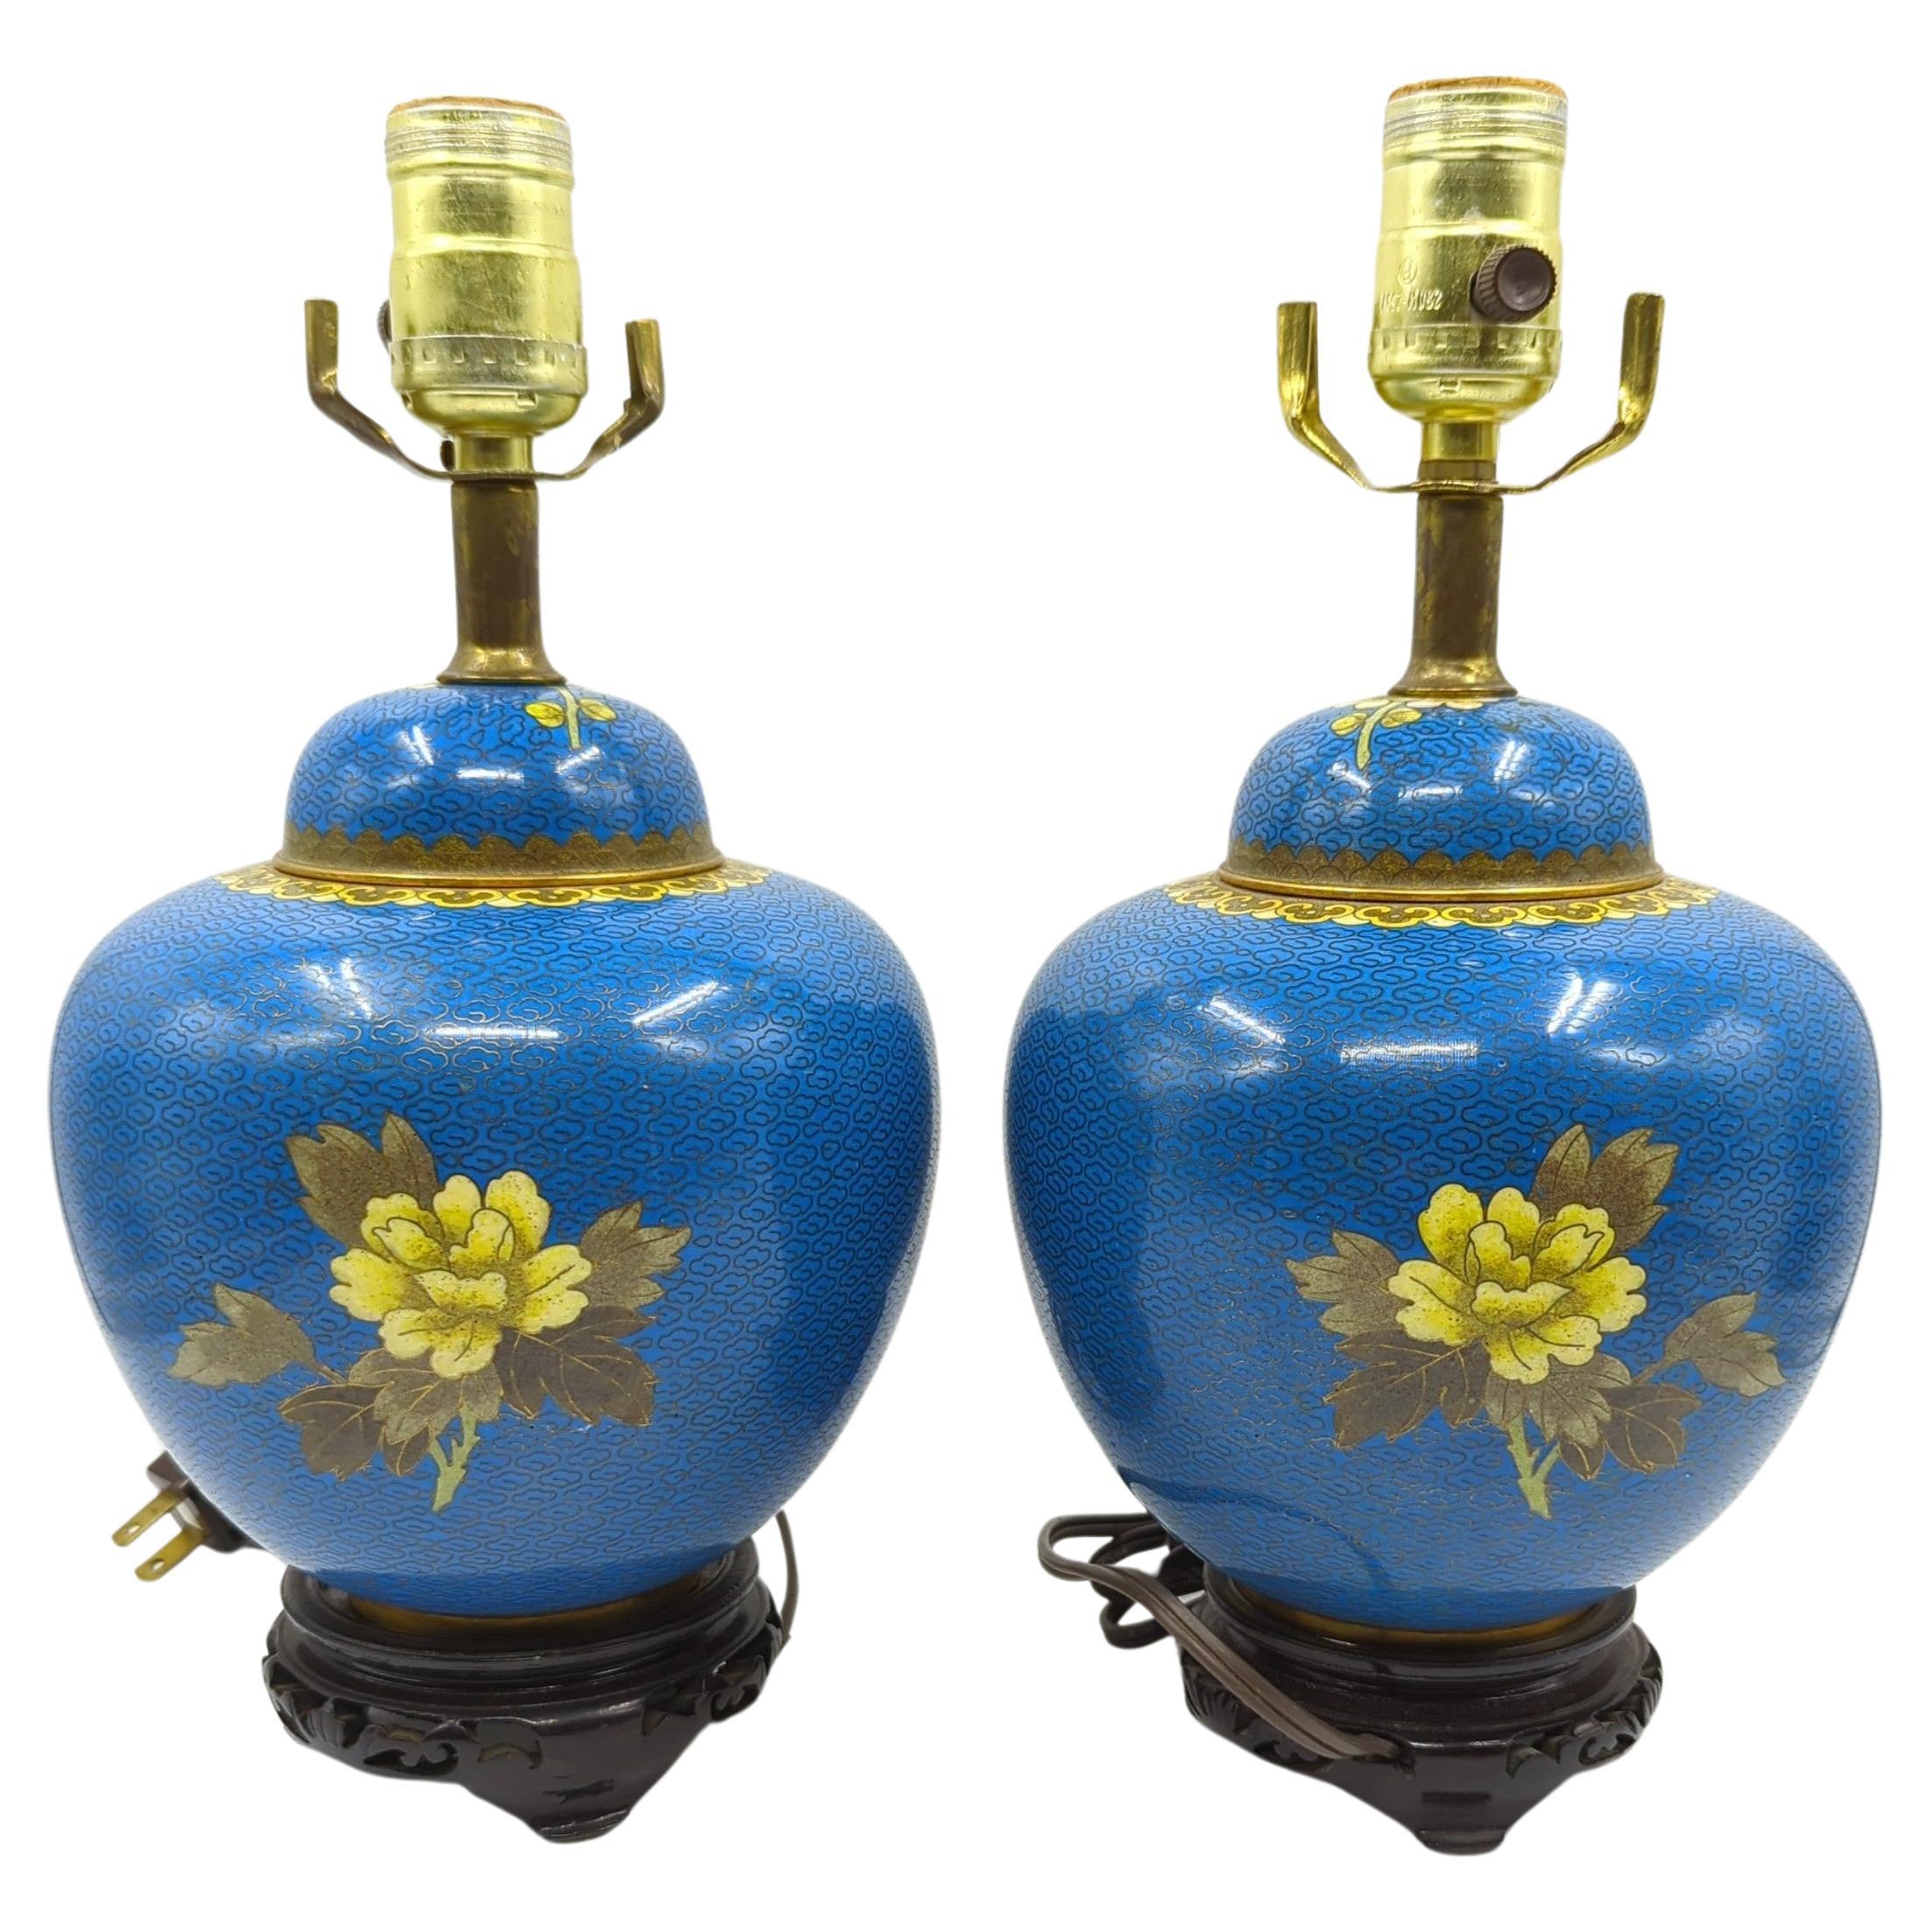 Pair Antique 19c Chinese Gilt Cloisonne Covered Prunus Ginger Jar Table Lamps For Sale 2